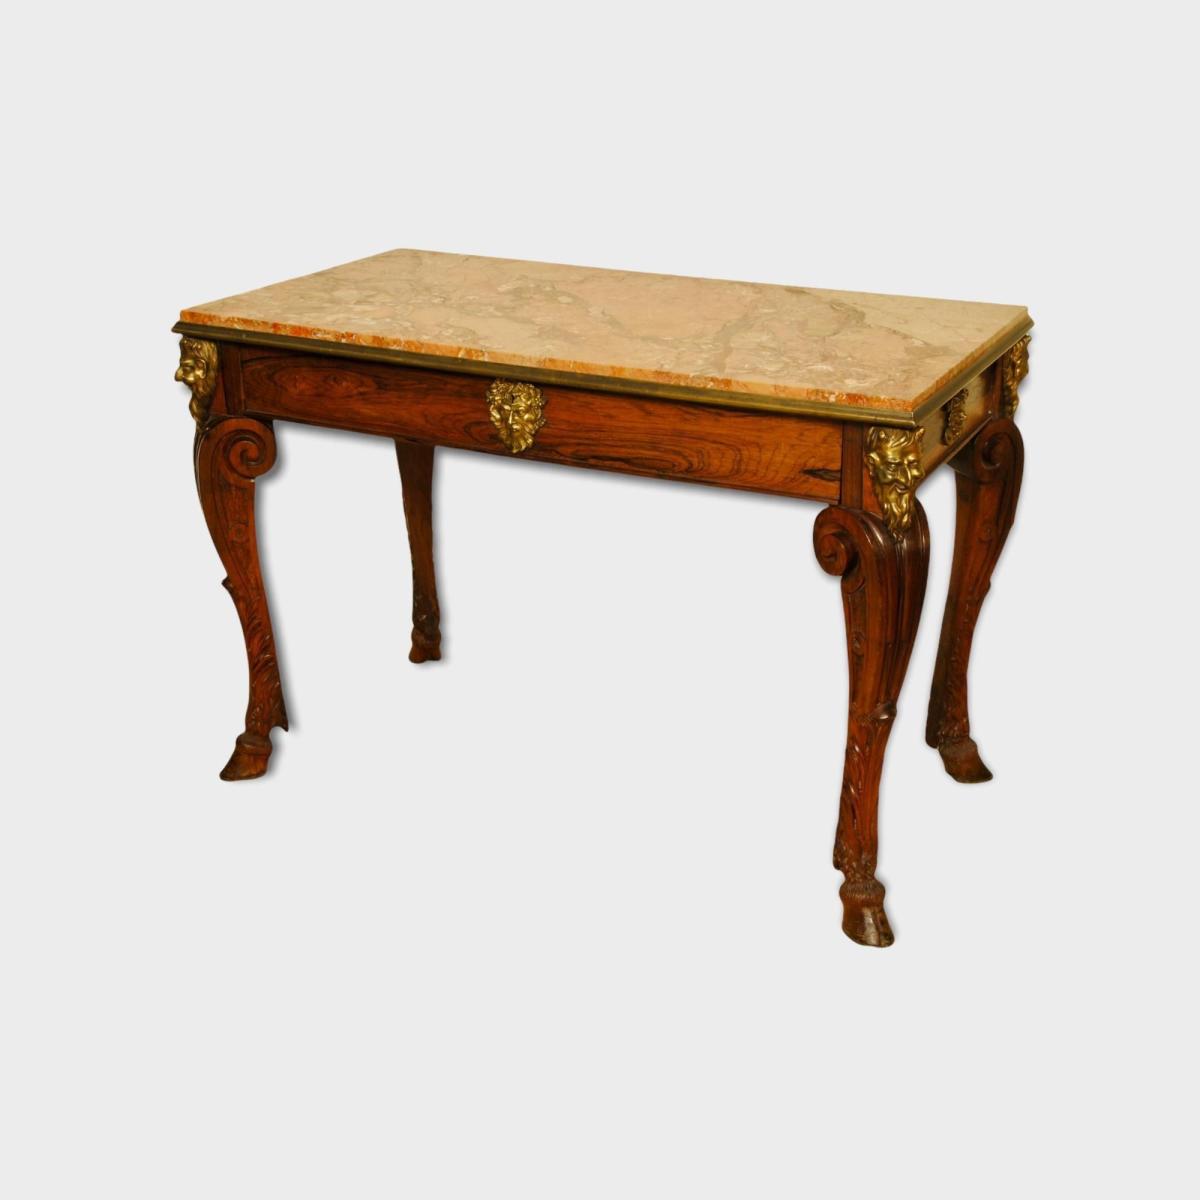 19th Century Rosewood and Ormolu Mounted Centre Table